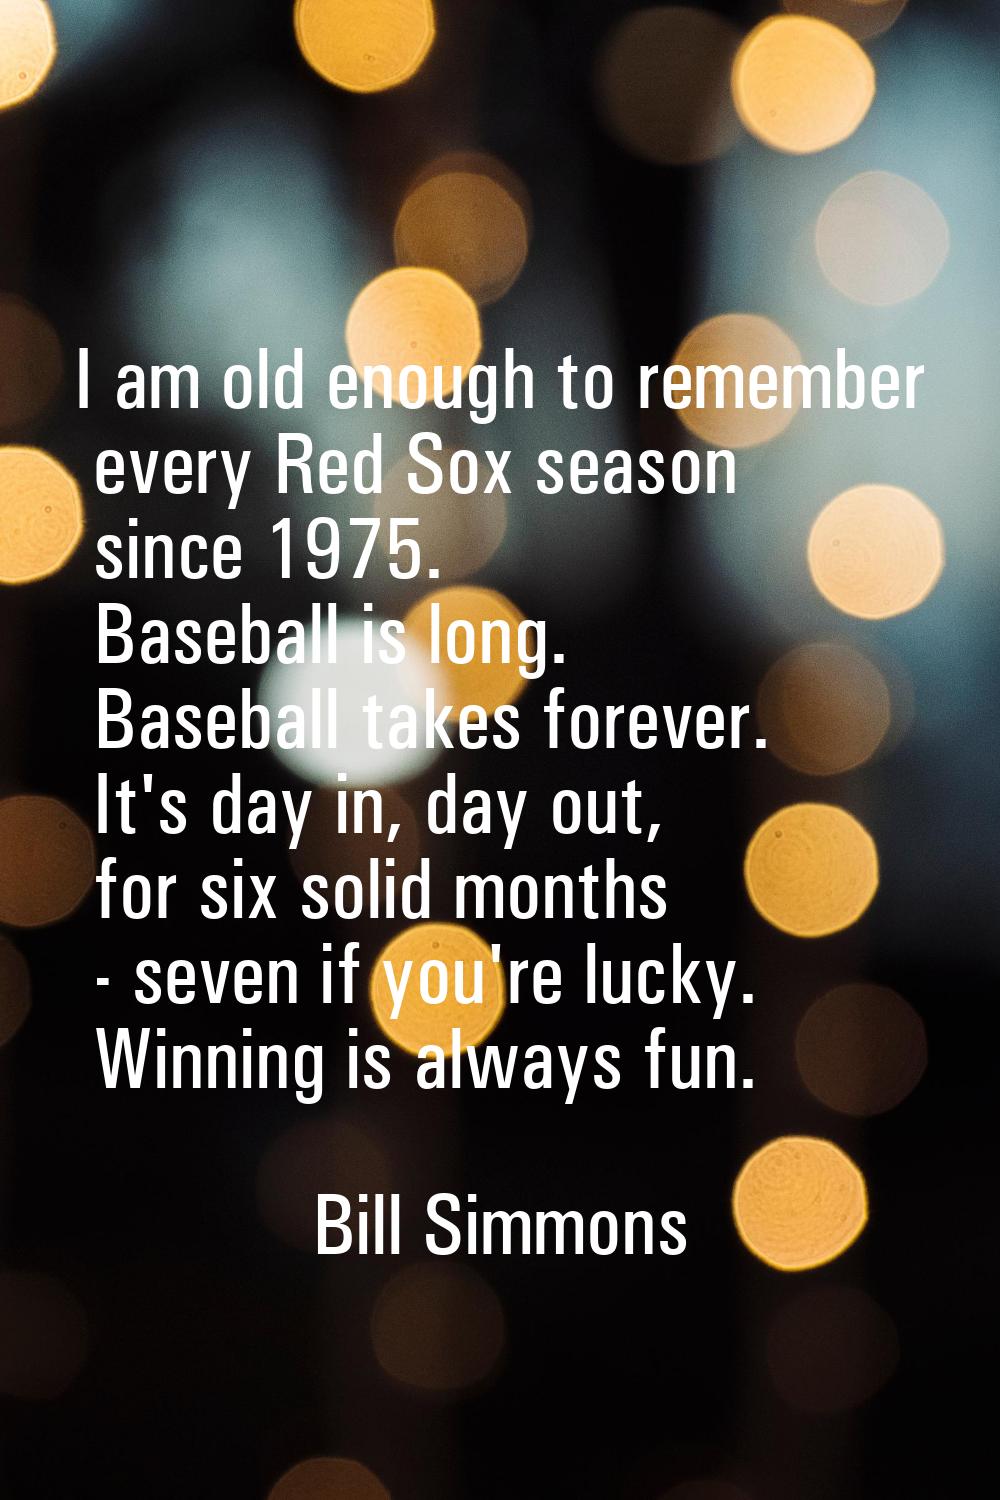 I am old enough to remember every Red Sox season since 1975. Baseball is long. Baseball takes forev